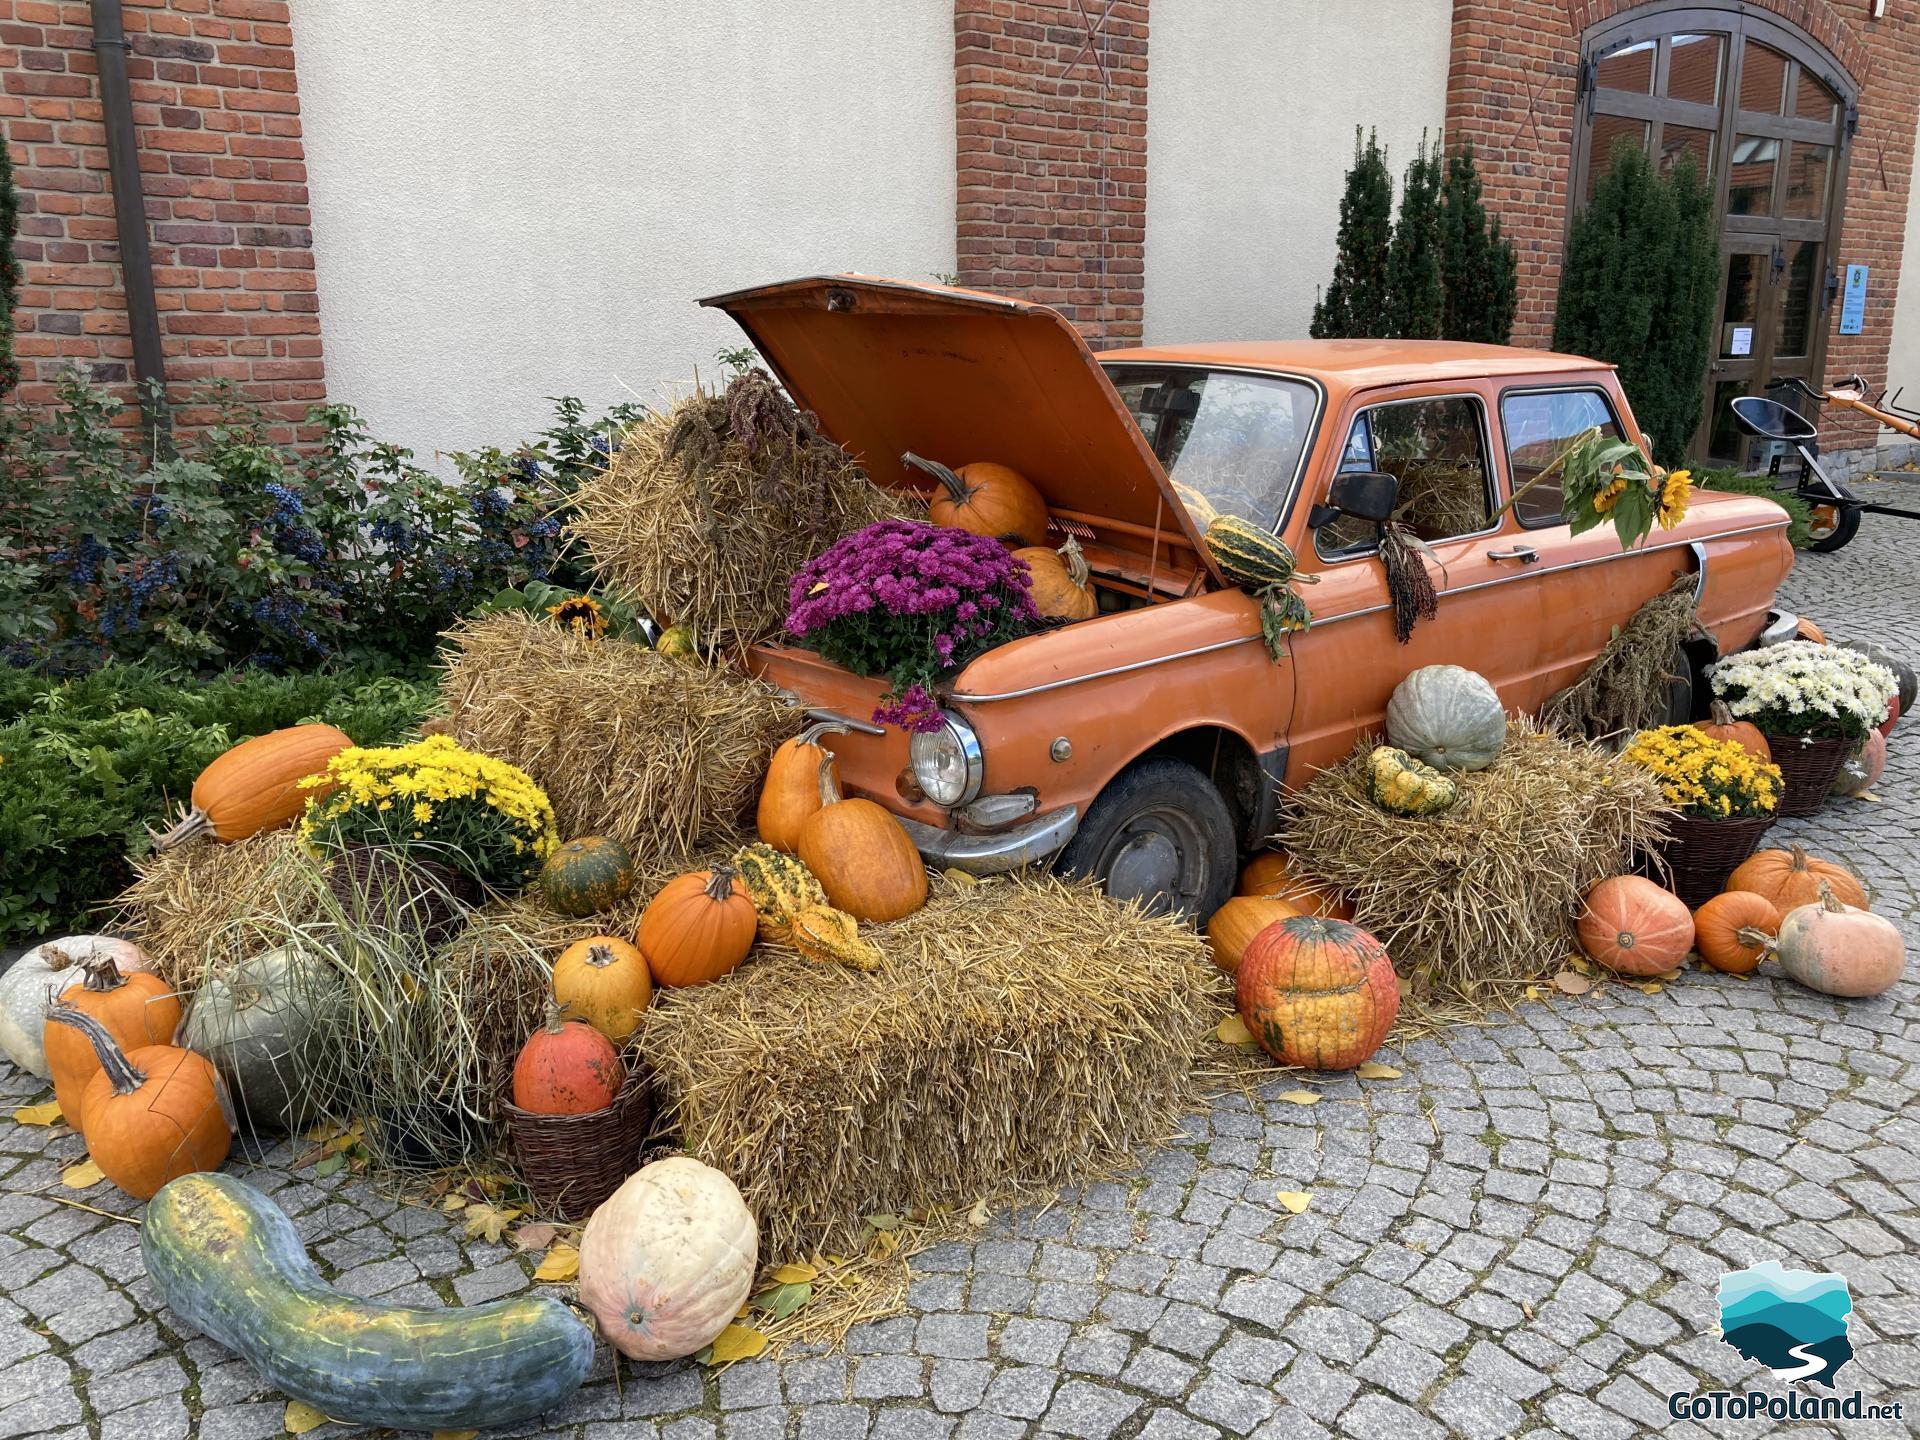 An old car with a many orange pumpkins, violet and yellow flowers and hay as decoration